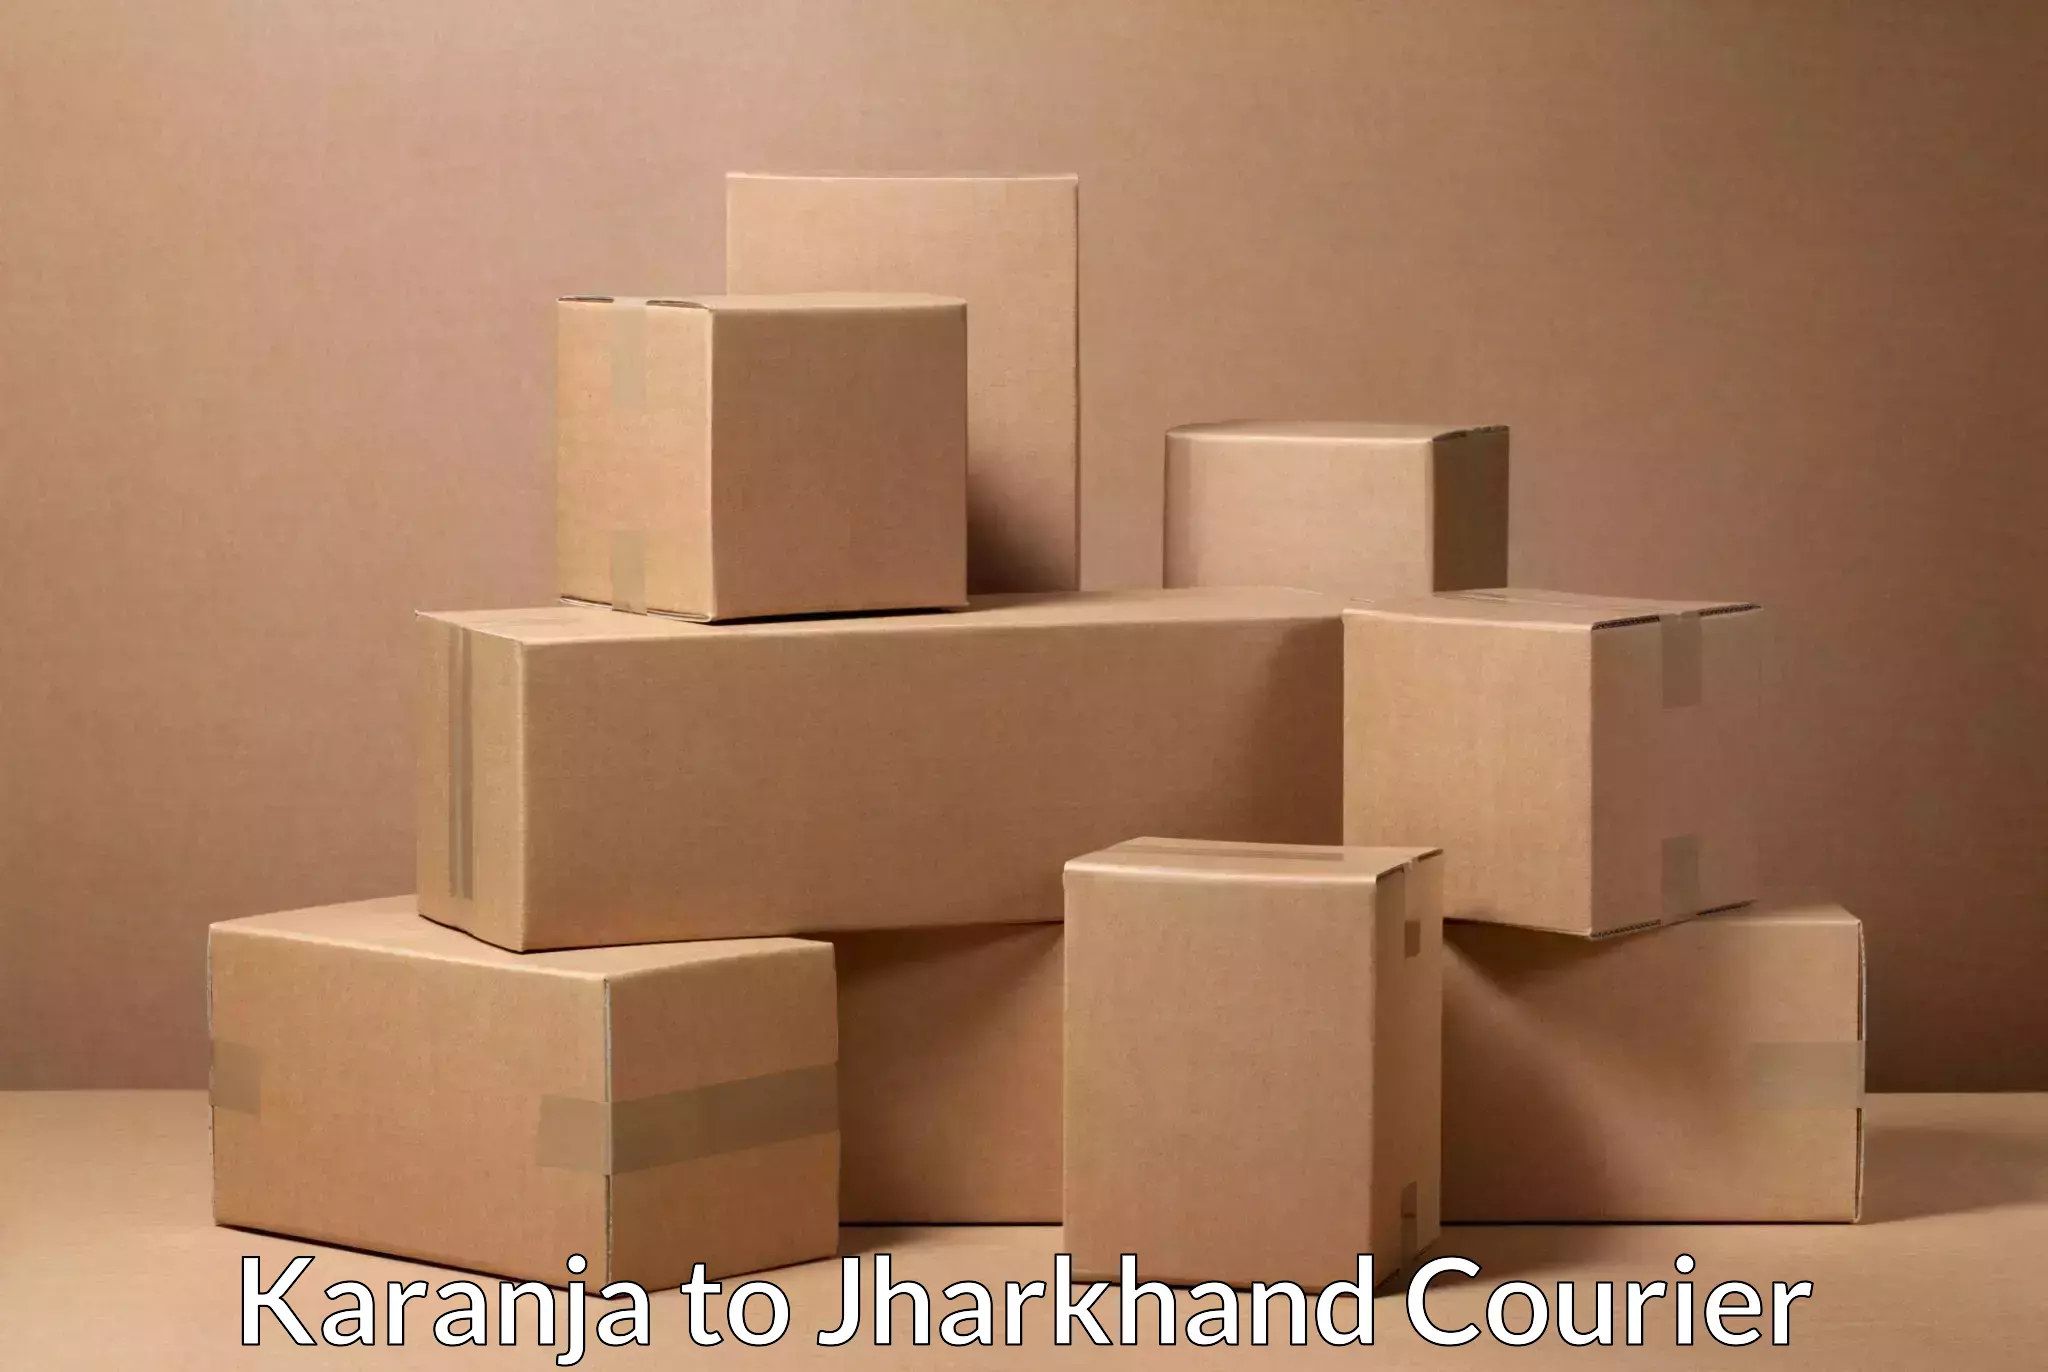 Flexible delivery schedules Karanja to Jharkhand